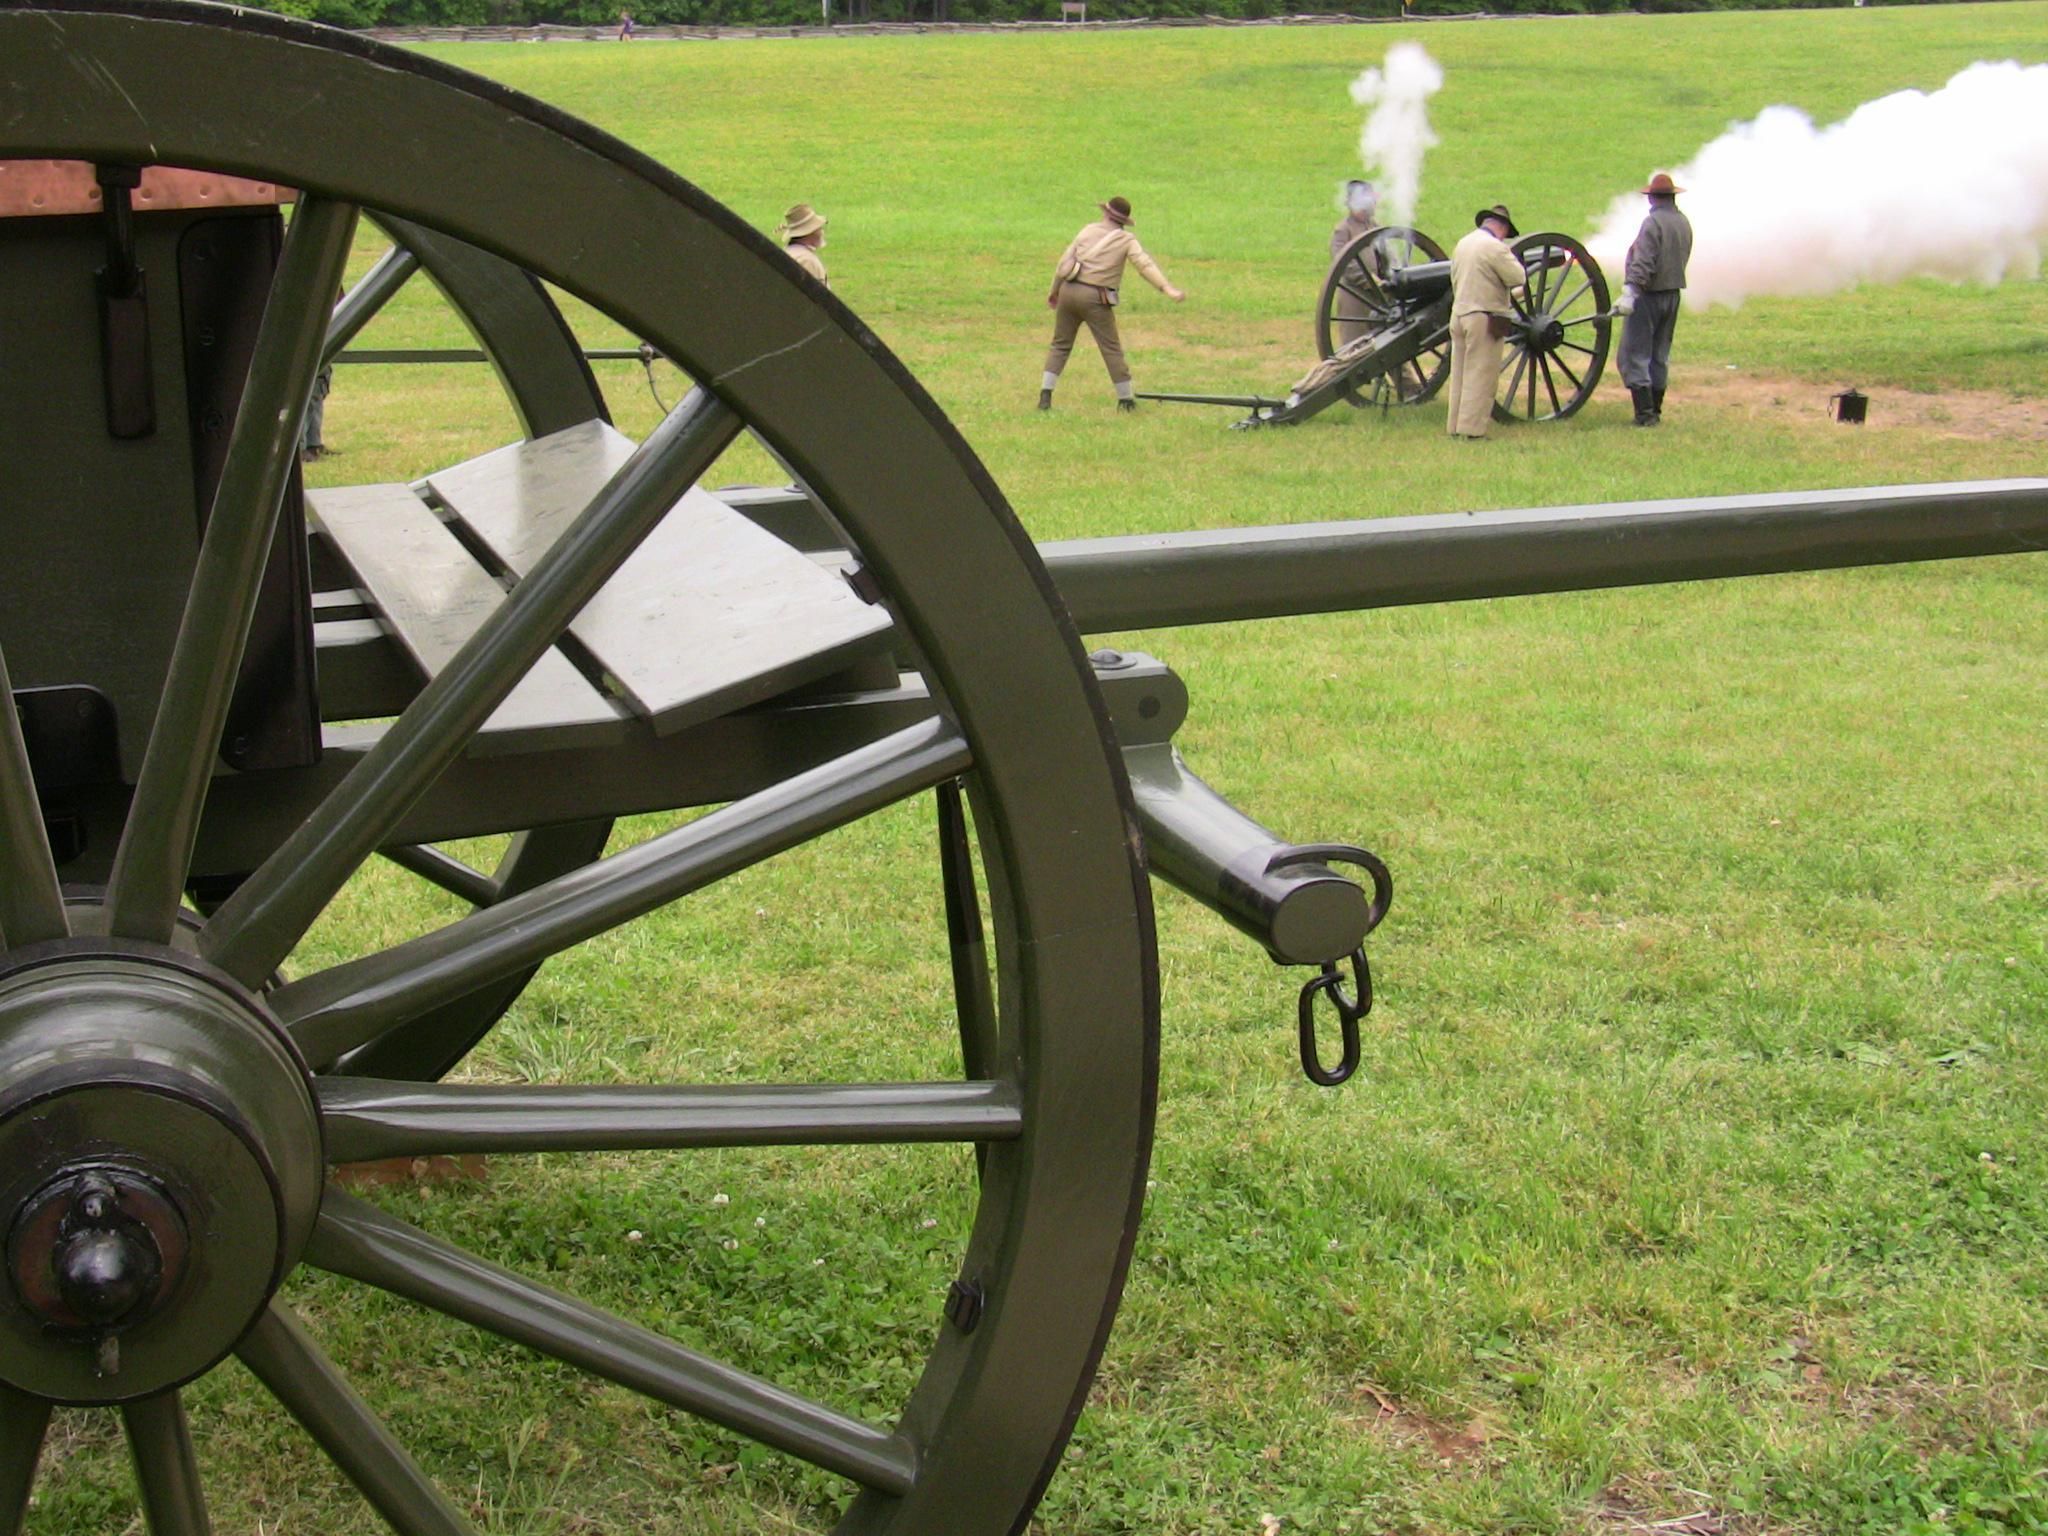 Casson with Cannon Fire Demonstration.